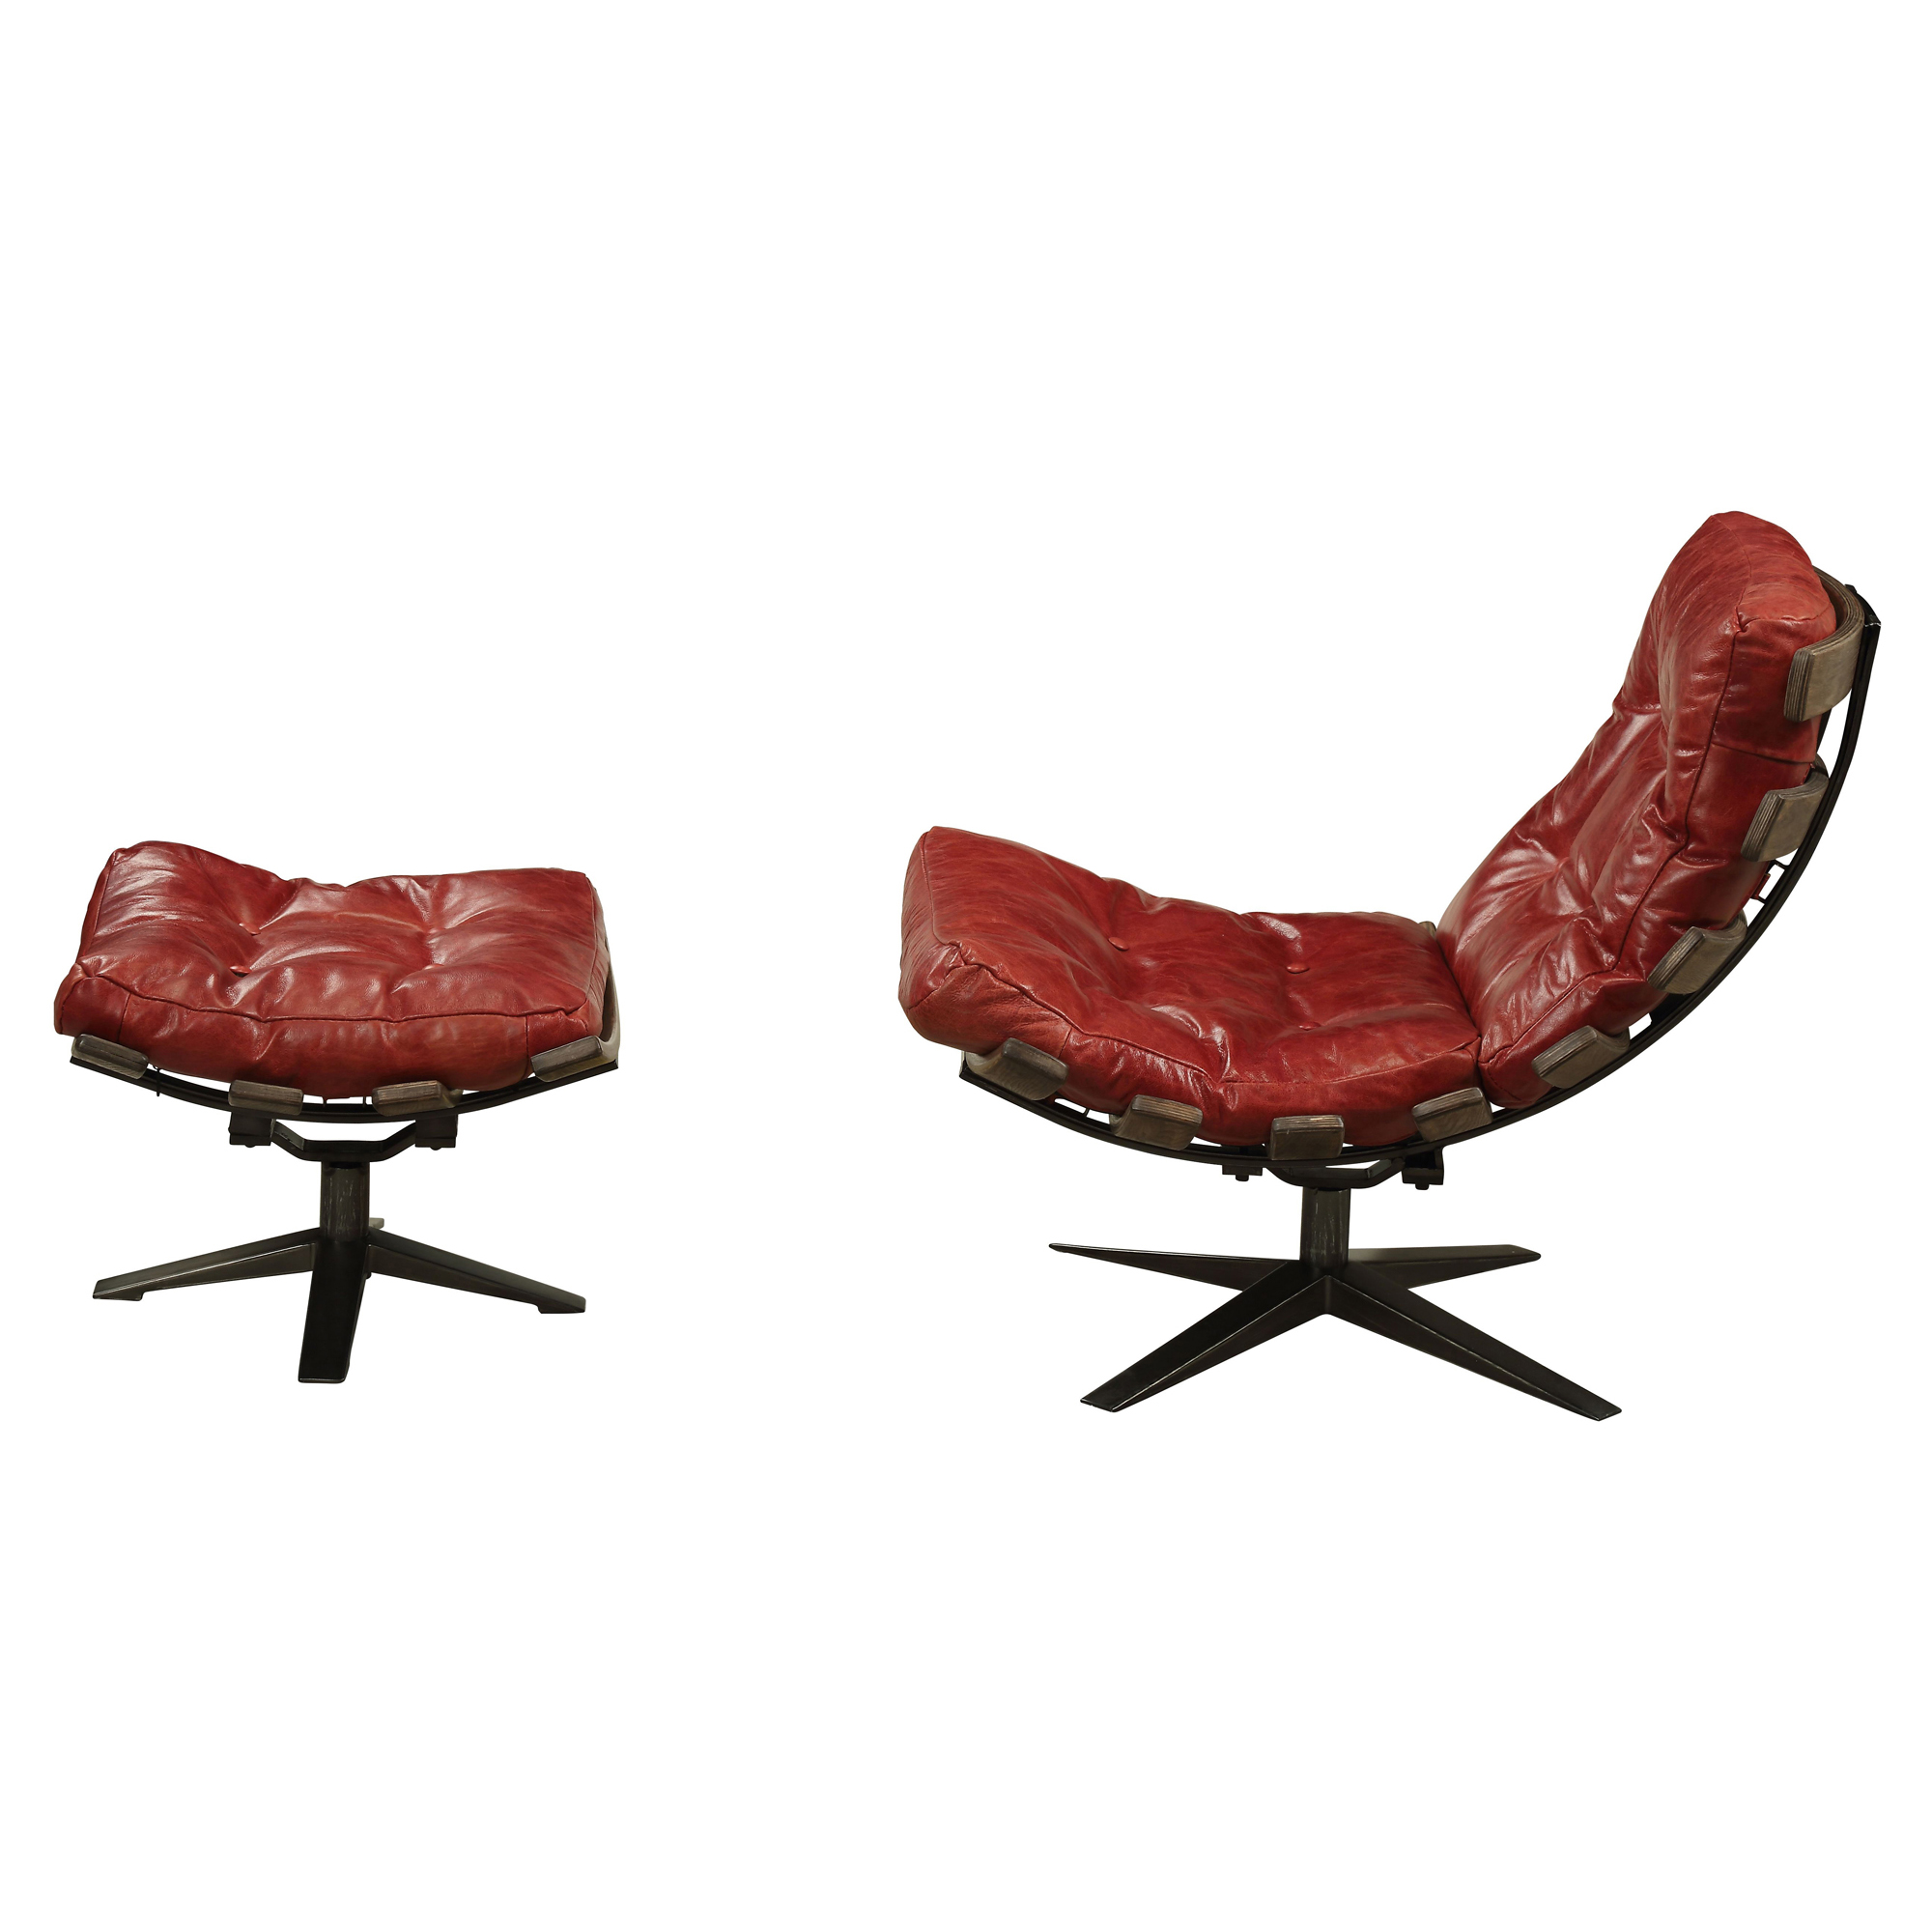 ACME Gandy 2-piece Chair and Ottoman Set in Antique Red and Brown - image 3 of 8